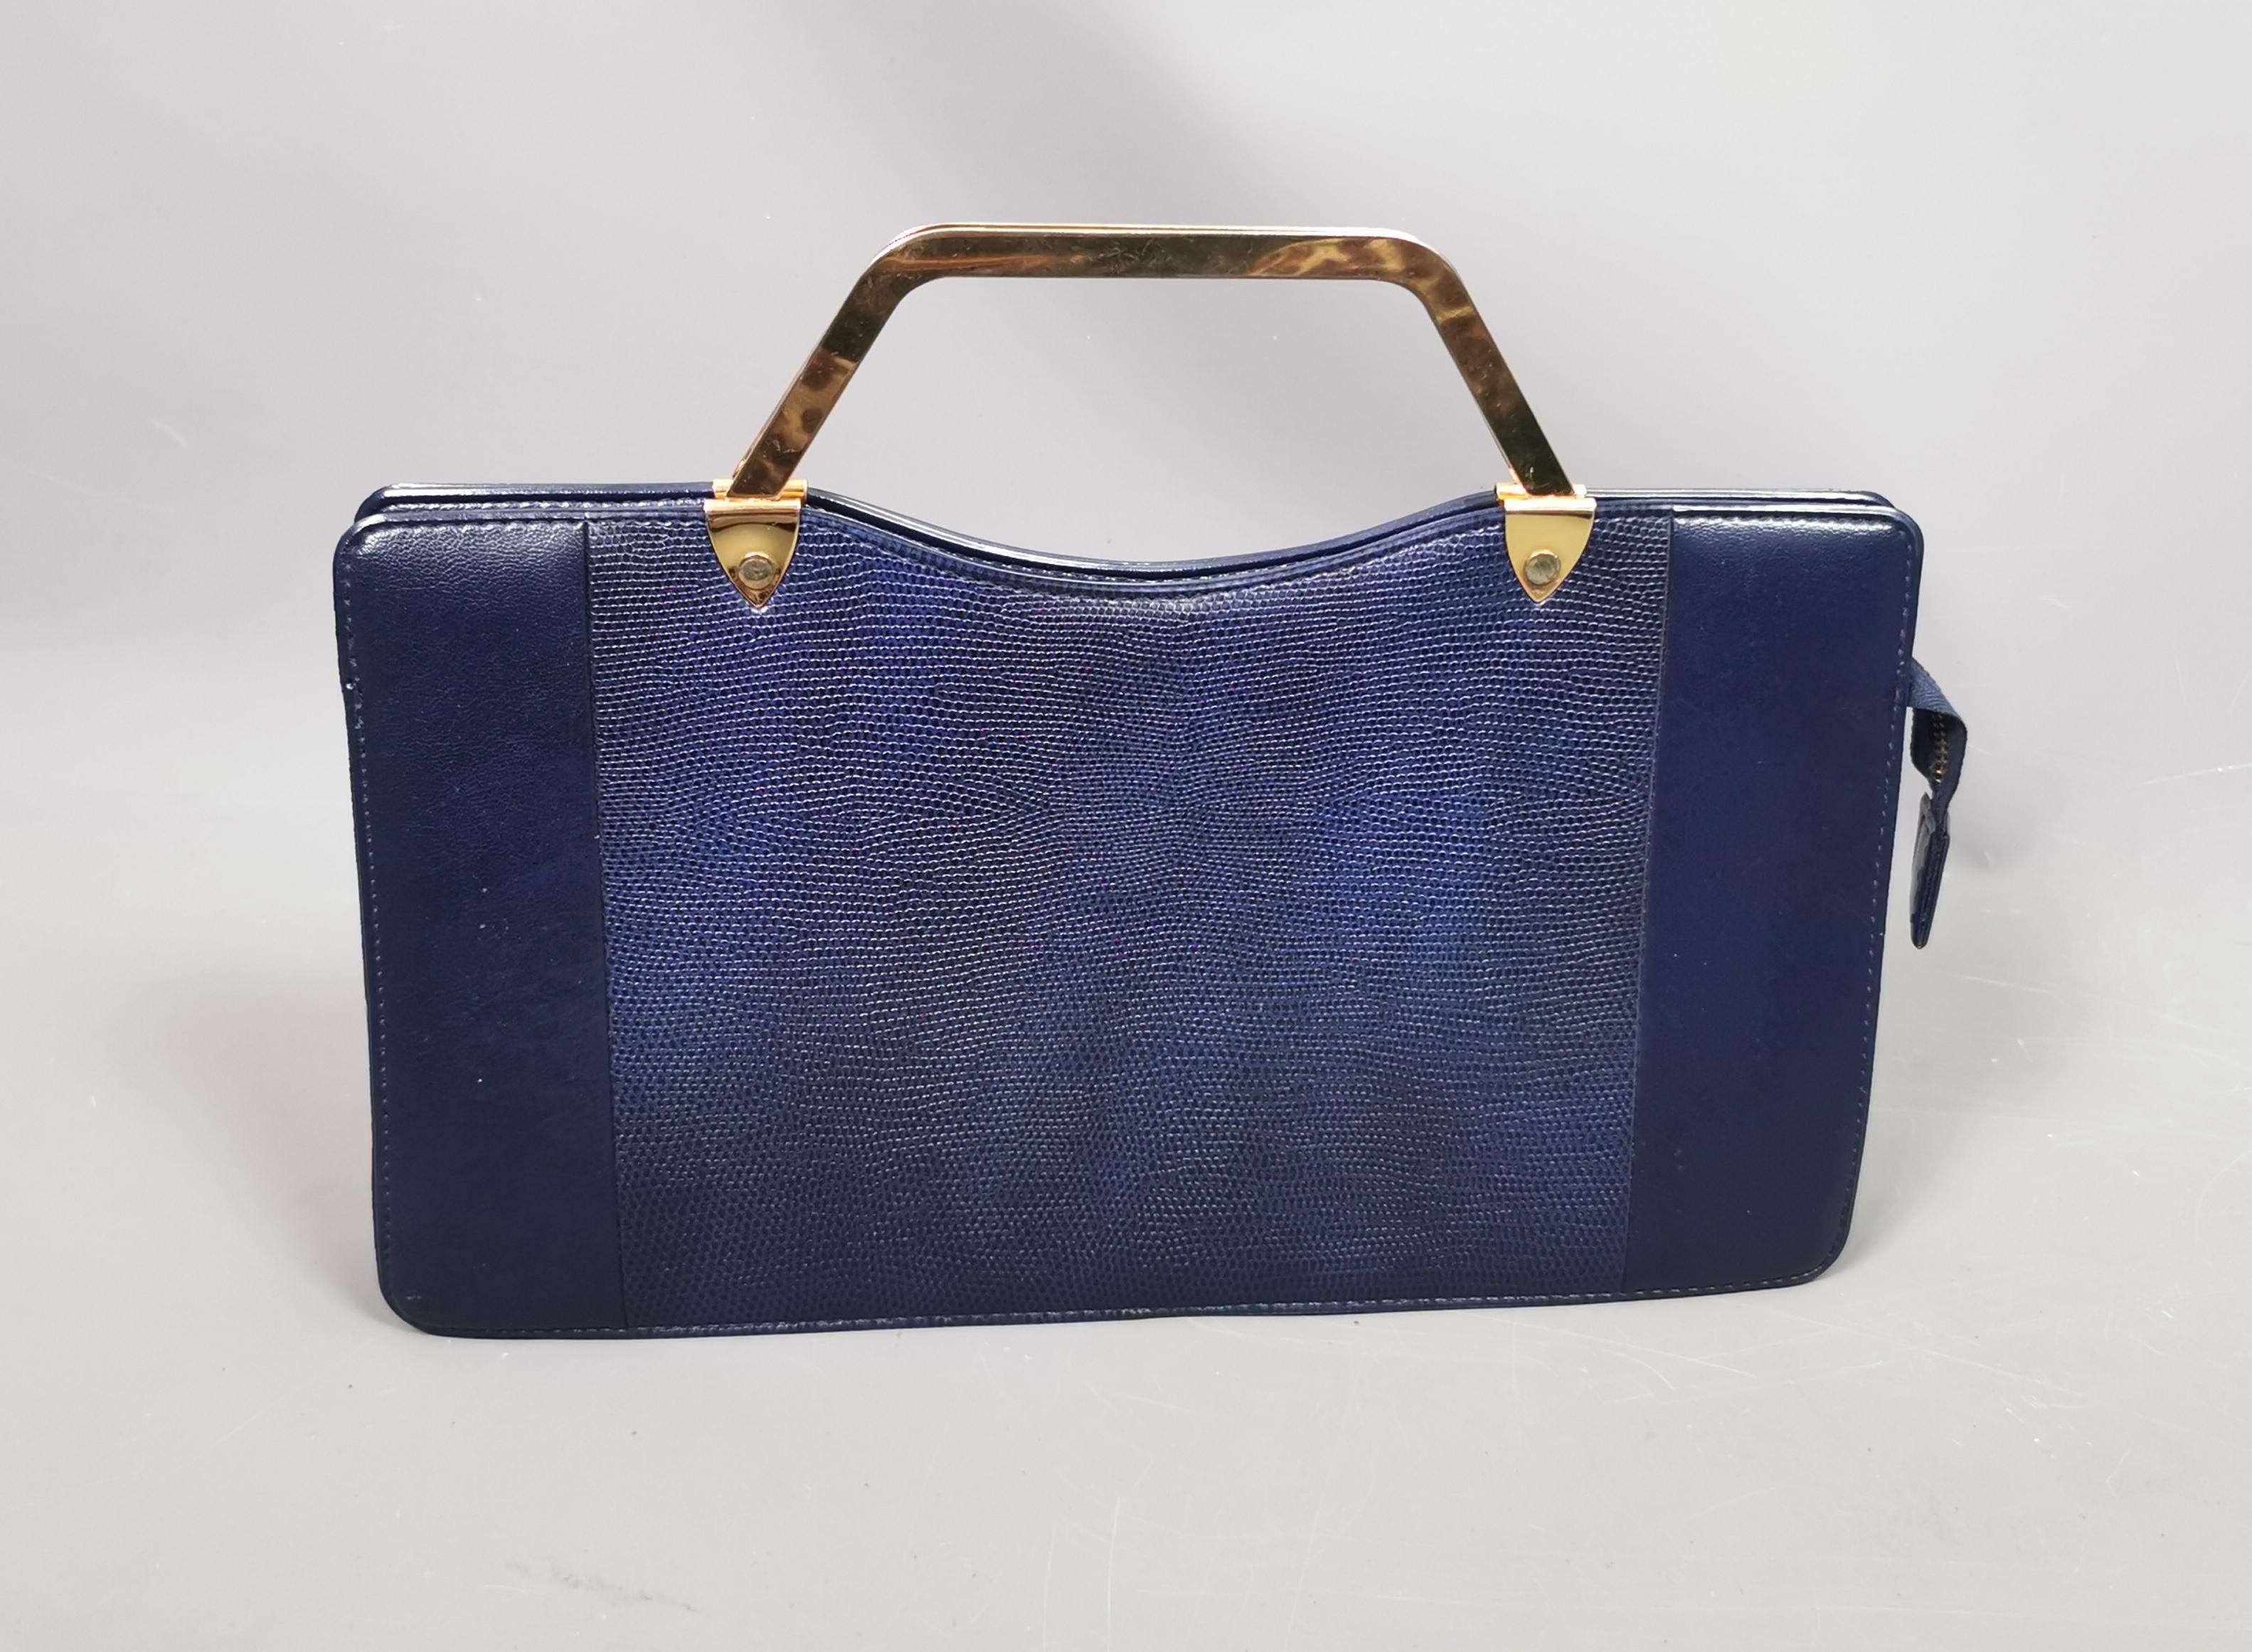 A gorgeous vintage c1980s faux snakeskin handbag.

It is a navy colour leather with a faux snakeskin design to the front and back centre with smooth ends.

The bag has geometric shape gold tone metal top handles and opens with a zip